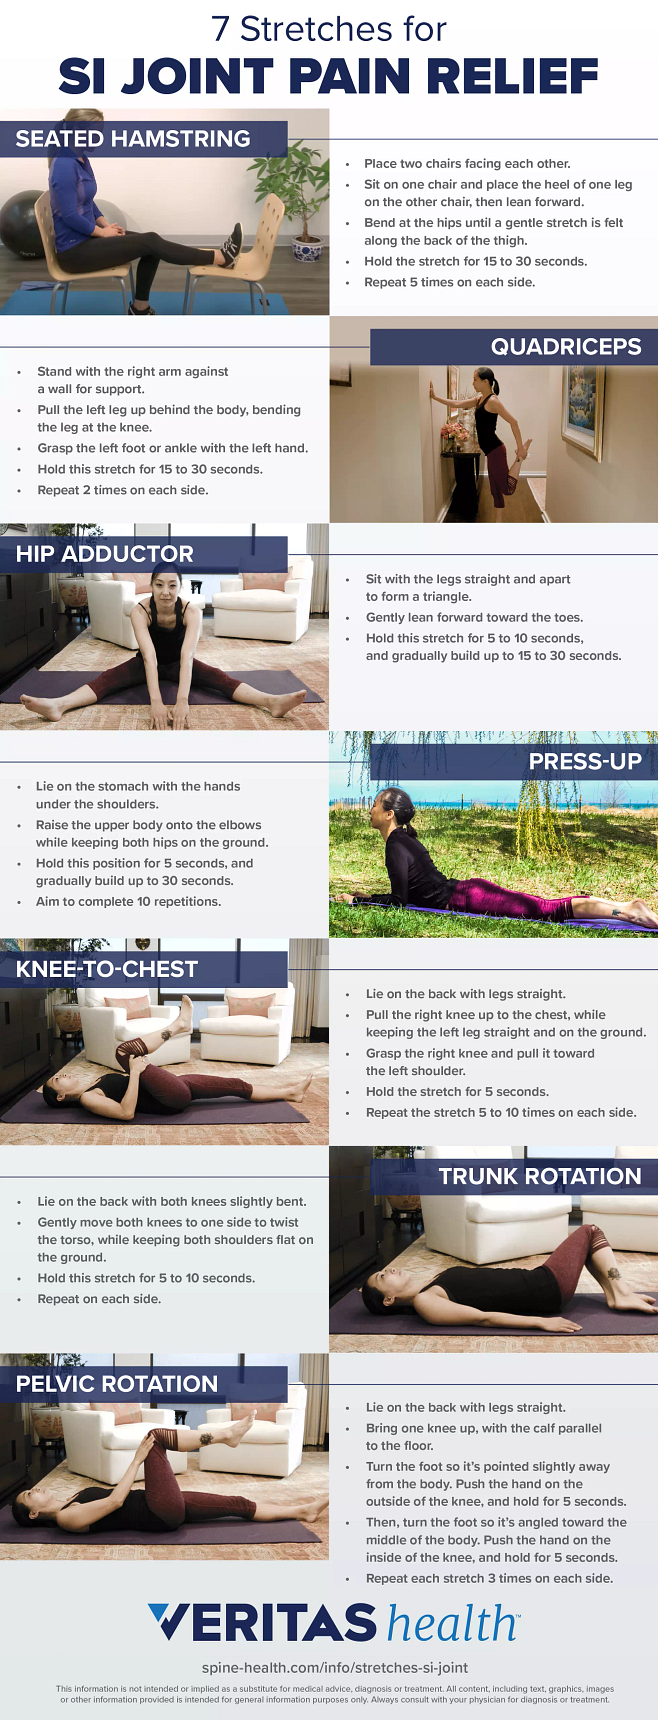 7 Stretches for SI Joint Pain Relief Infographic